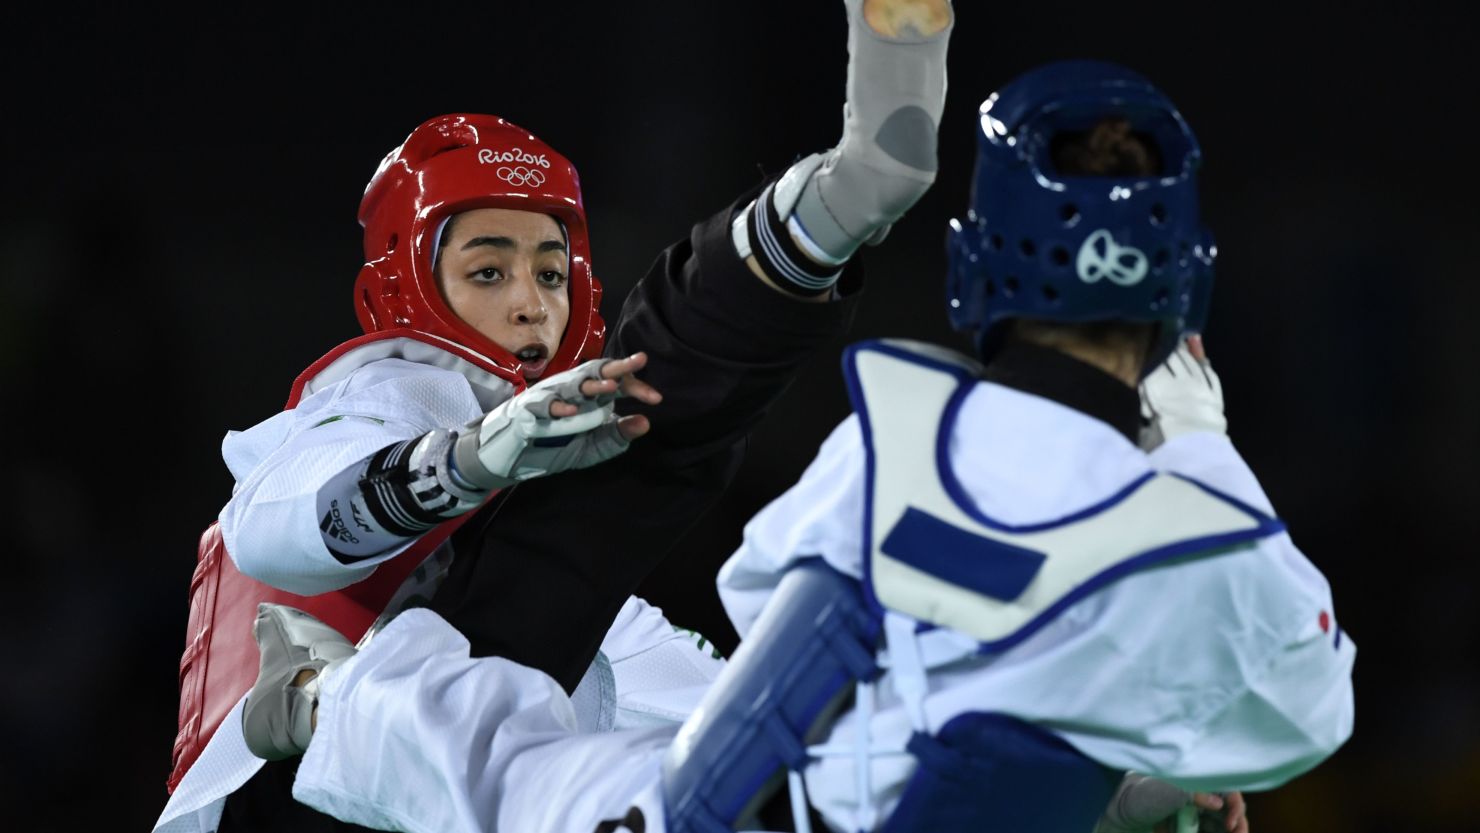 Kimia Alizadeh (L) competes with Croatia's Ana Zaninovic during their women's taekwondo qualifying bout in the -57kg category as part of the Rio 2016 Olympic Games, on August 18, 2016, at the Carioca Arena 3, in Rio de Janeiro. 